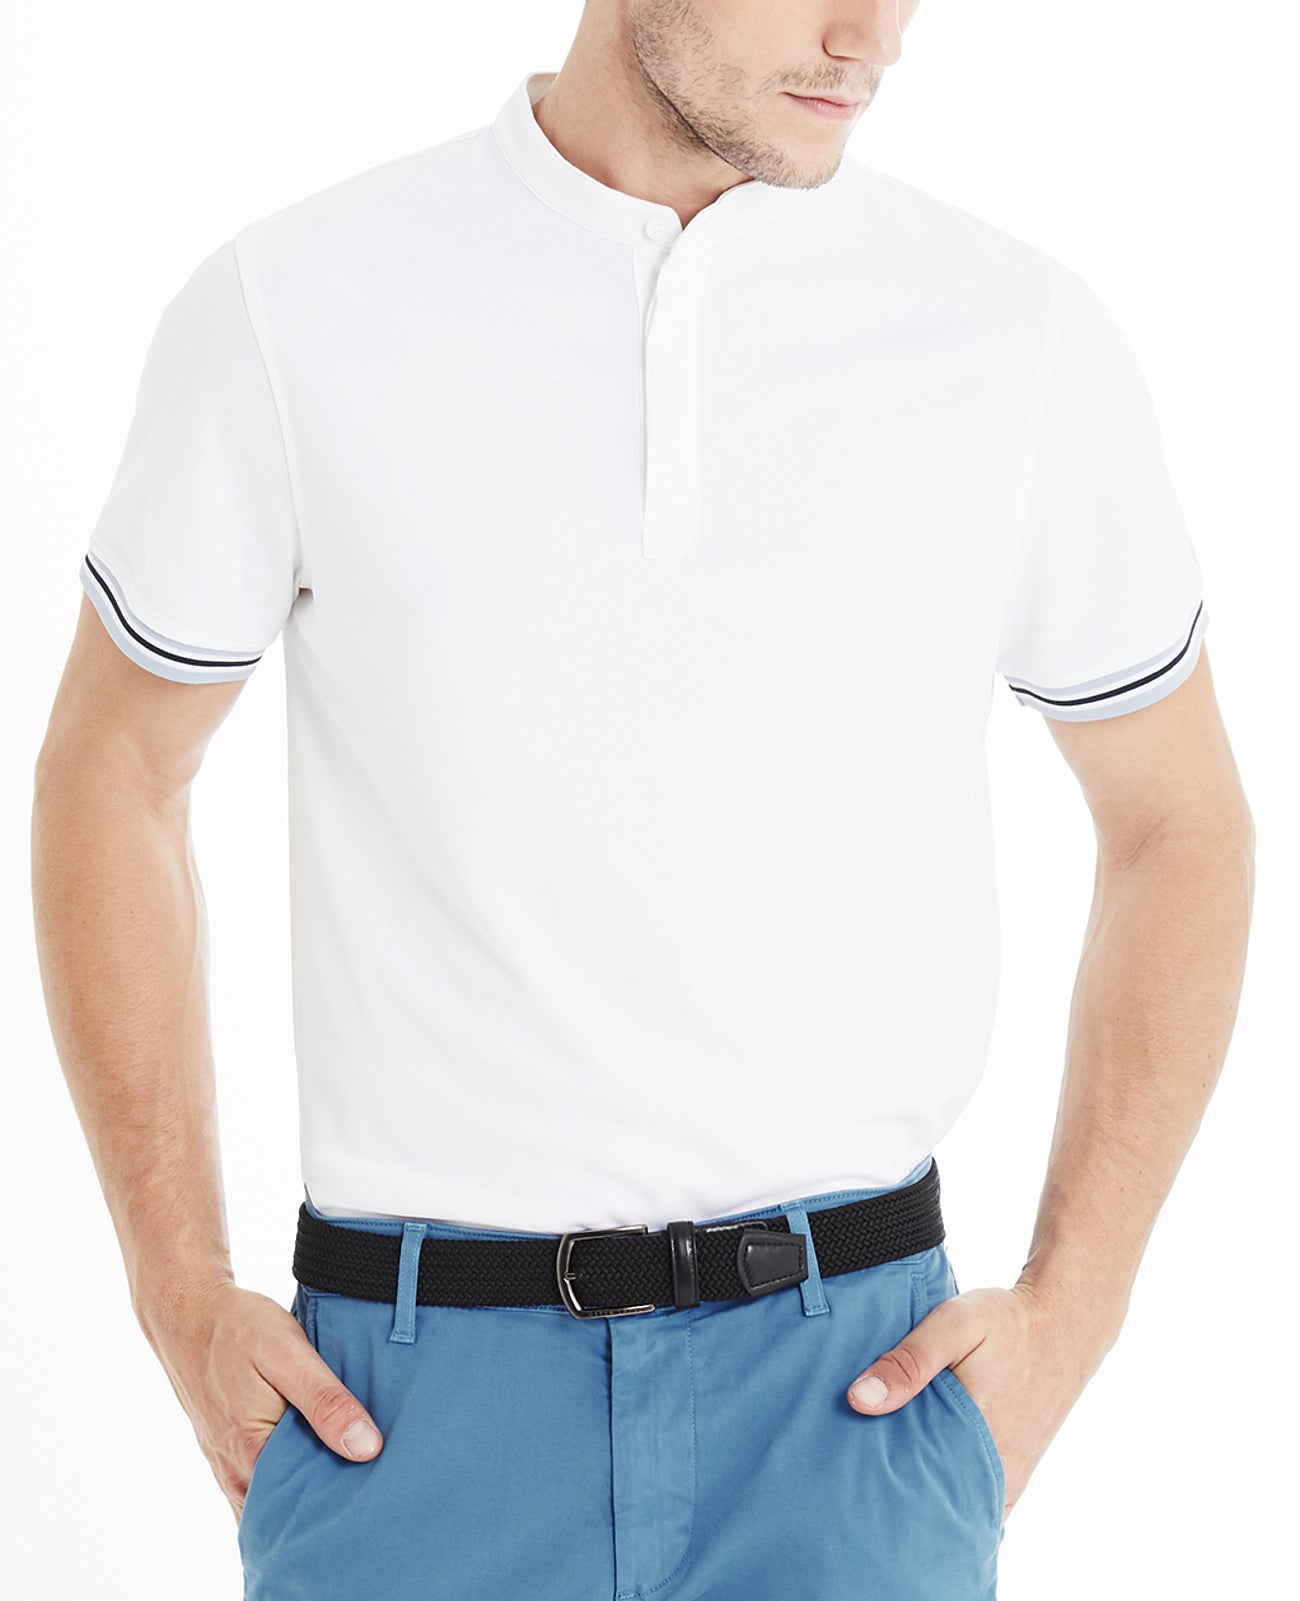 Haskett Polo Bright White Green Label Collection Men Tops Photo 1